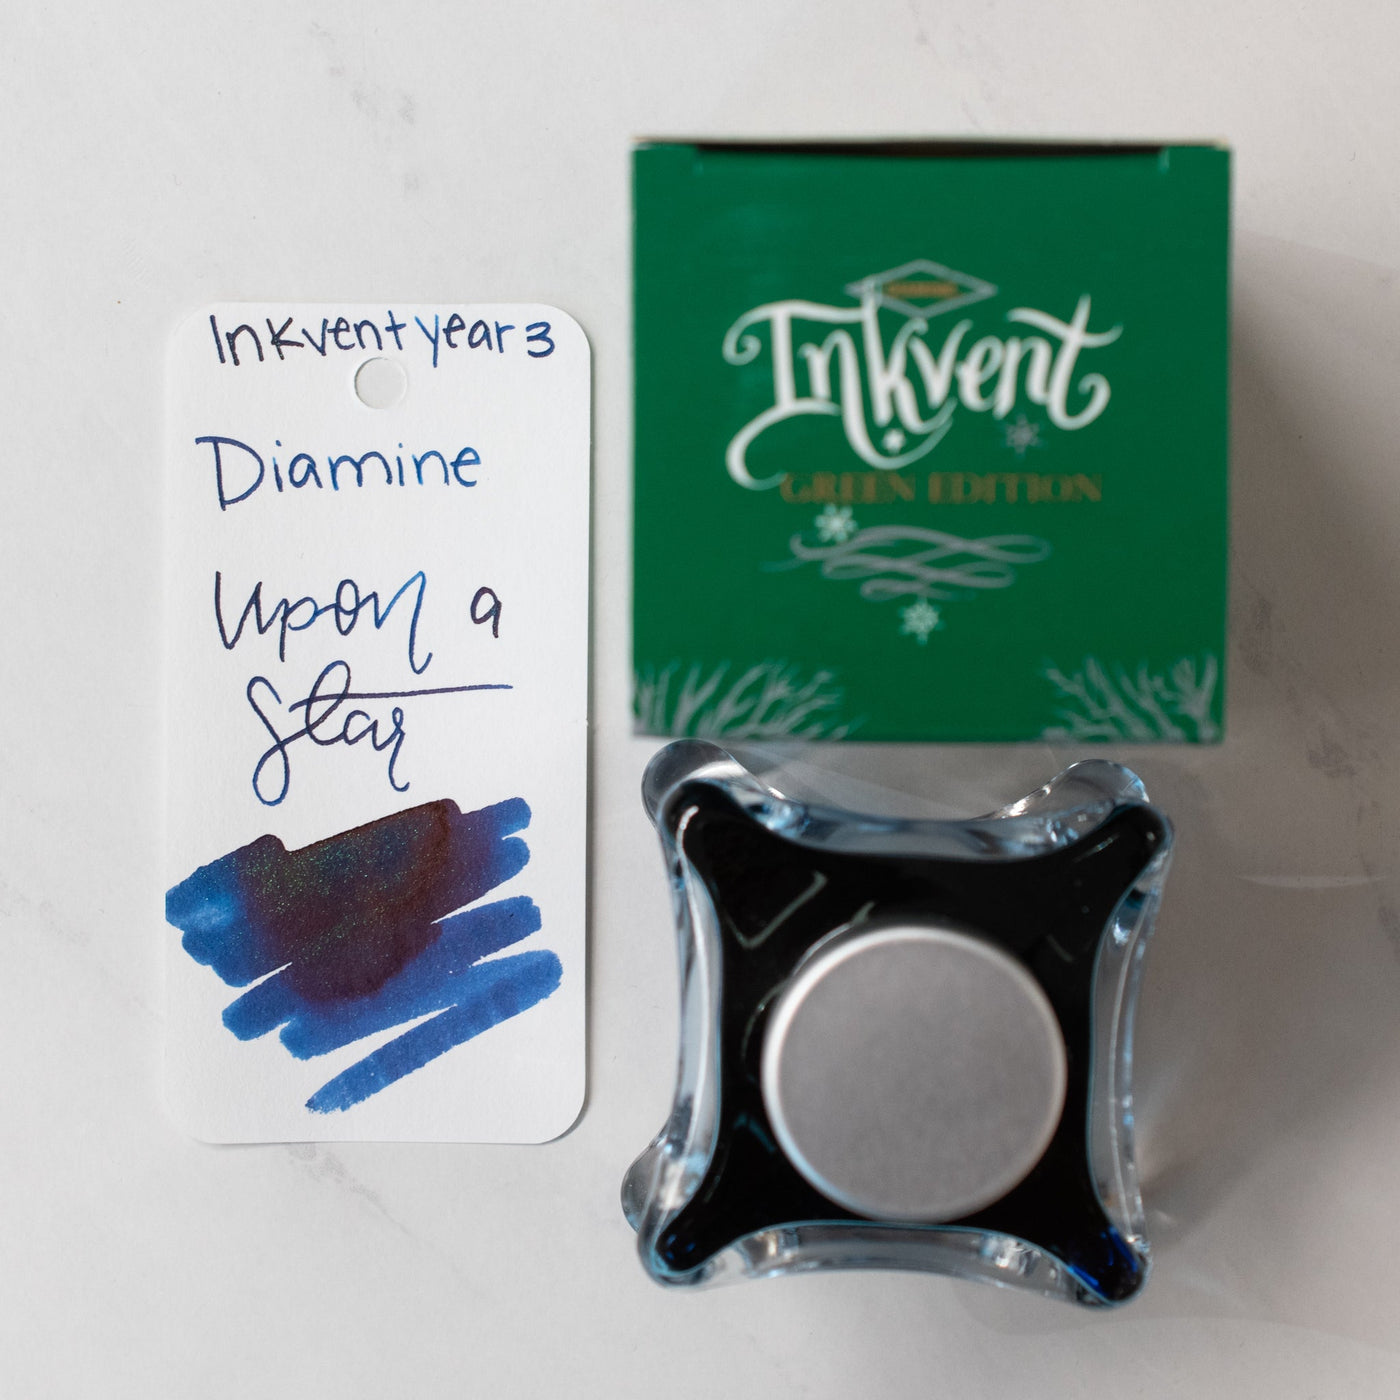 Diamine Inkvent Year 3 Upon A Star Ink 50mL Glass Bottle